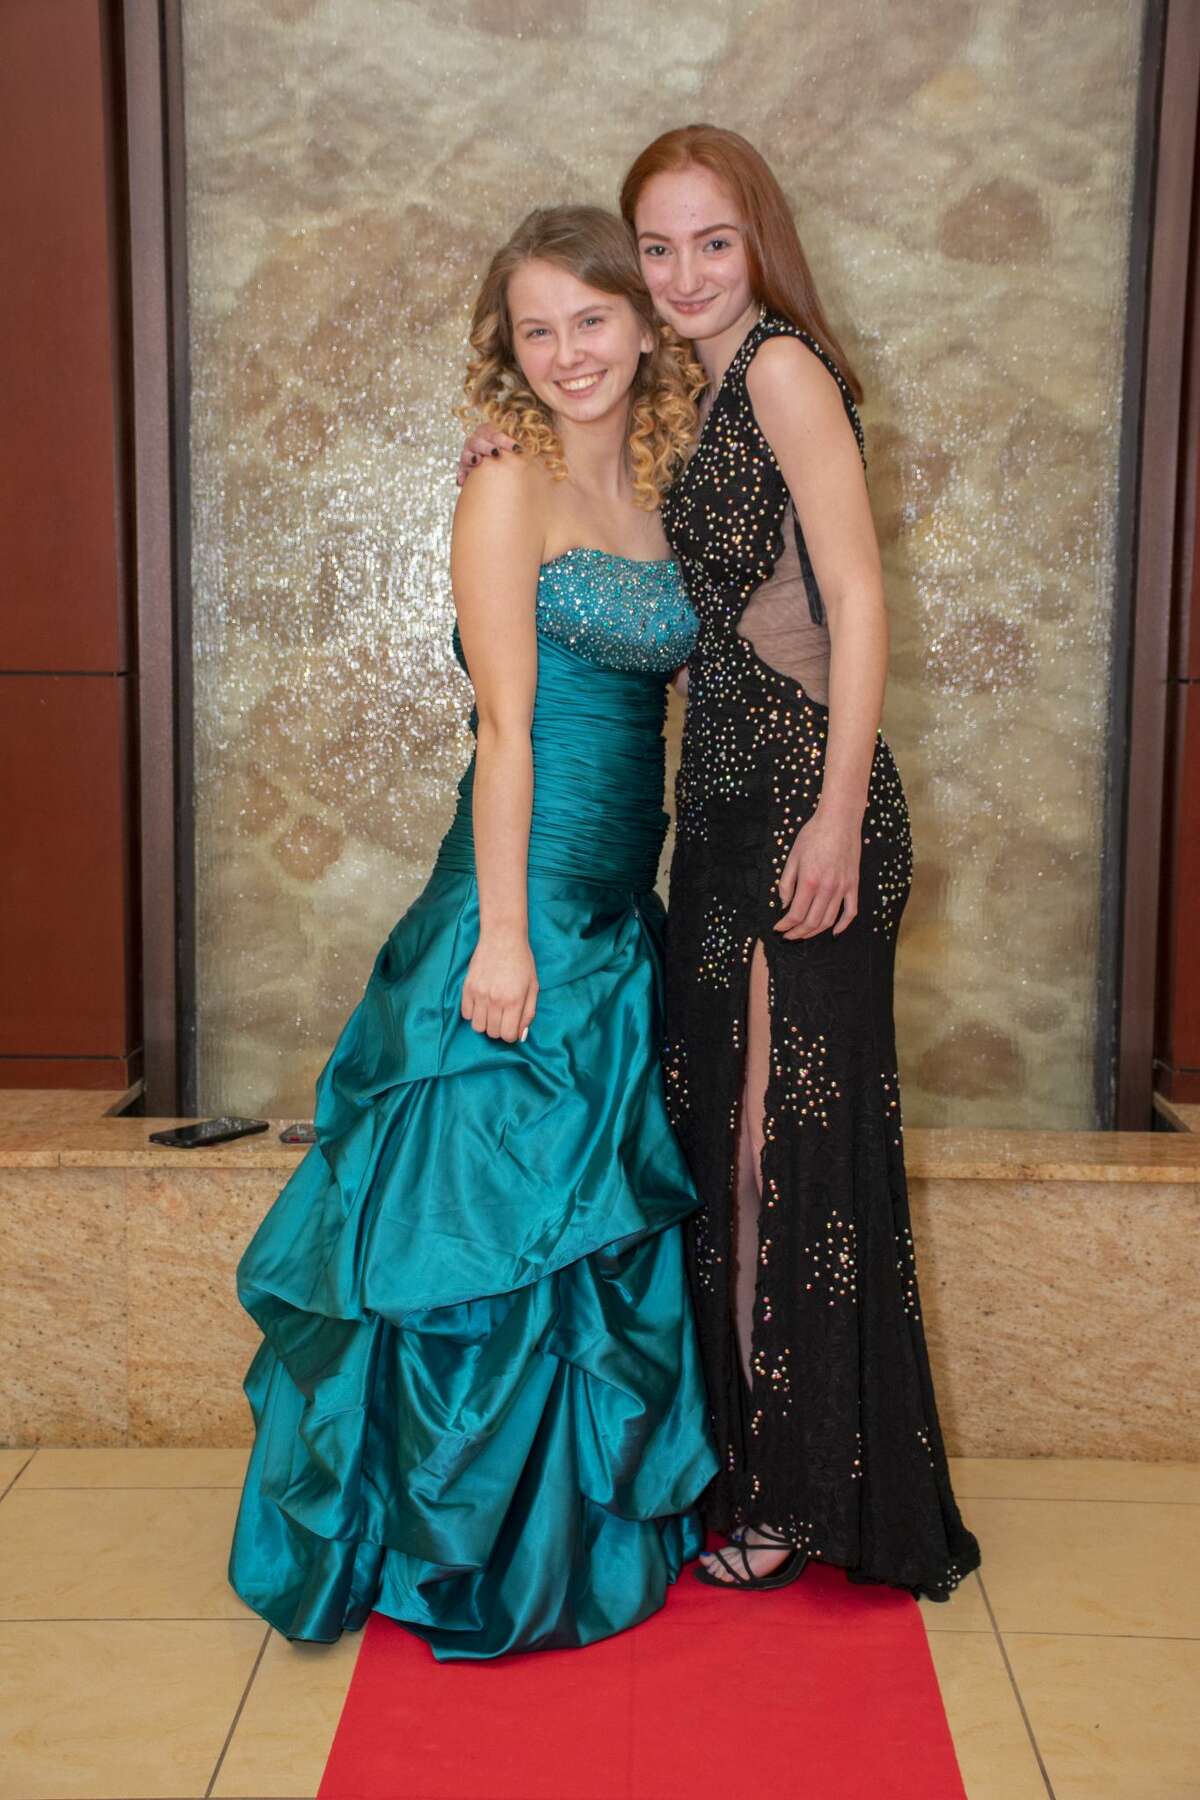 Were you seen at the Ravena-Coeymans-Selkirk High School Junior Prom at the Hilton Garden Inn in Troy on May 4th 2019?